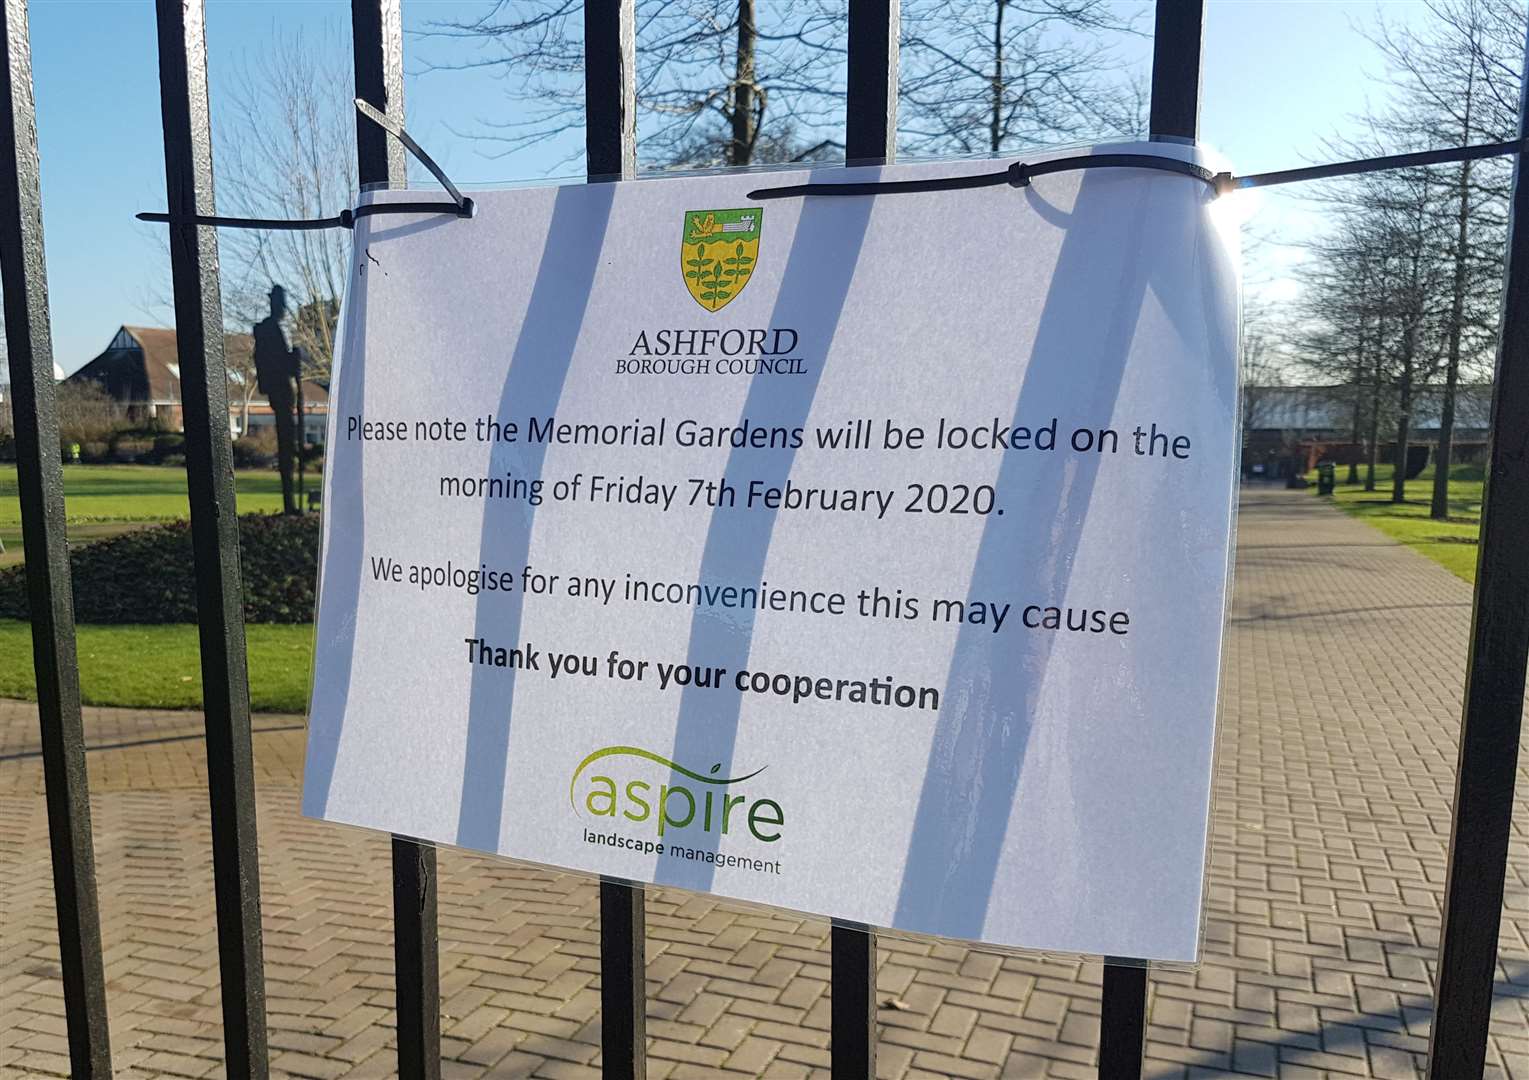 The council confirmed that the closure of the gardens is in connection with police activity